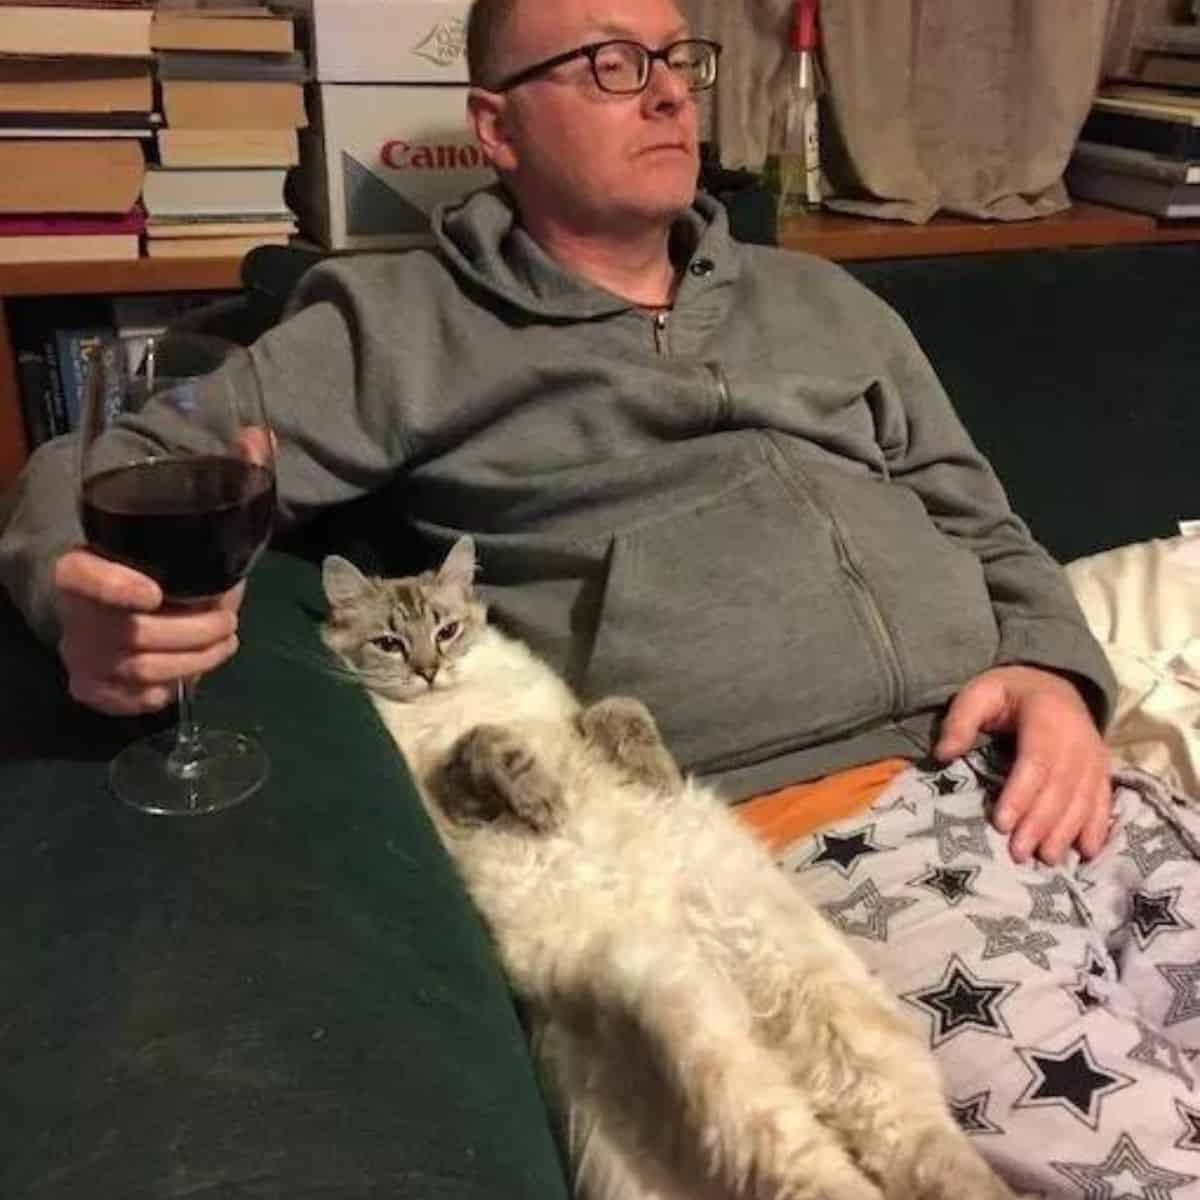 man relaxing with cat and glass of wine